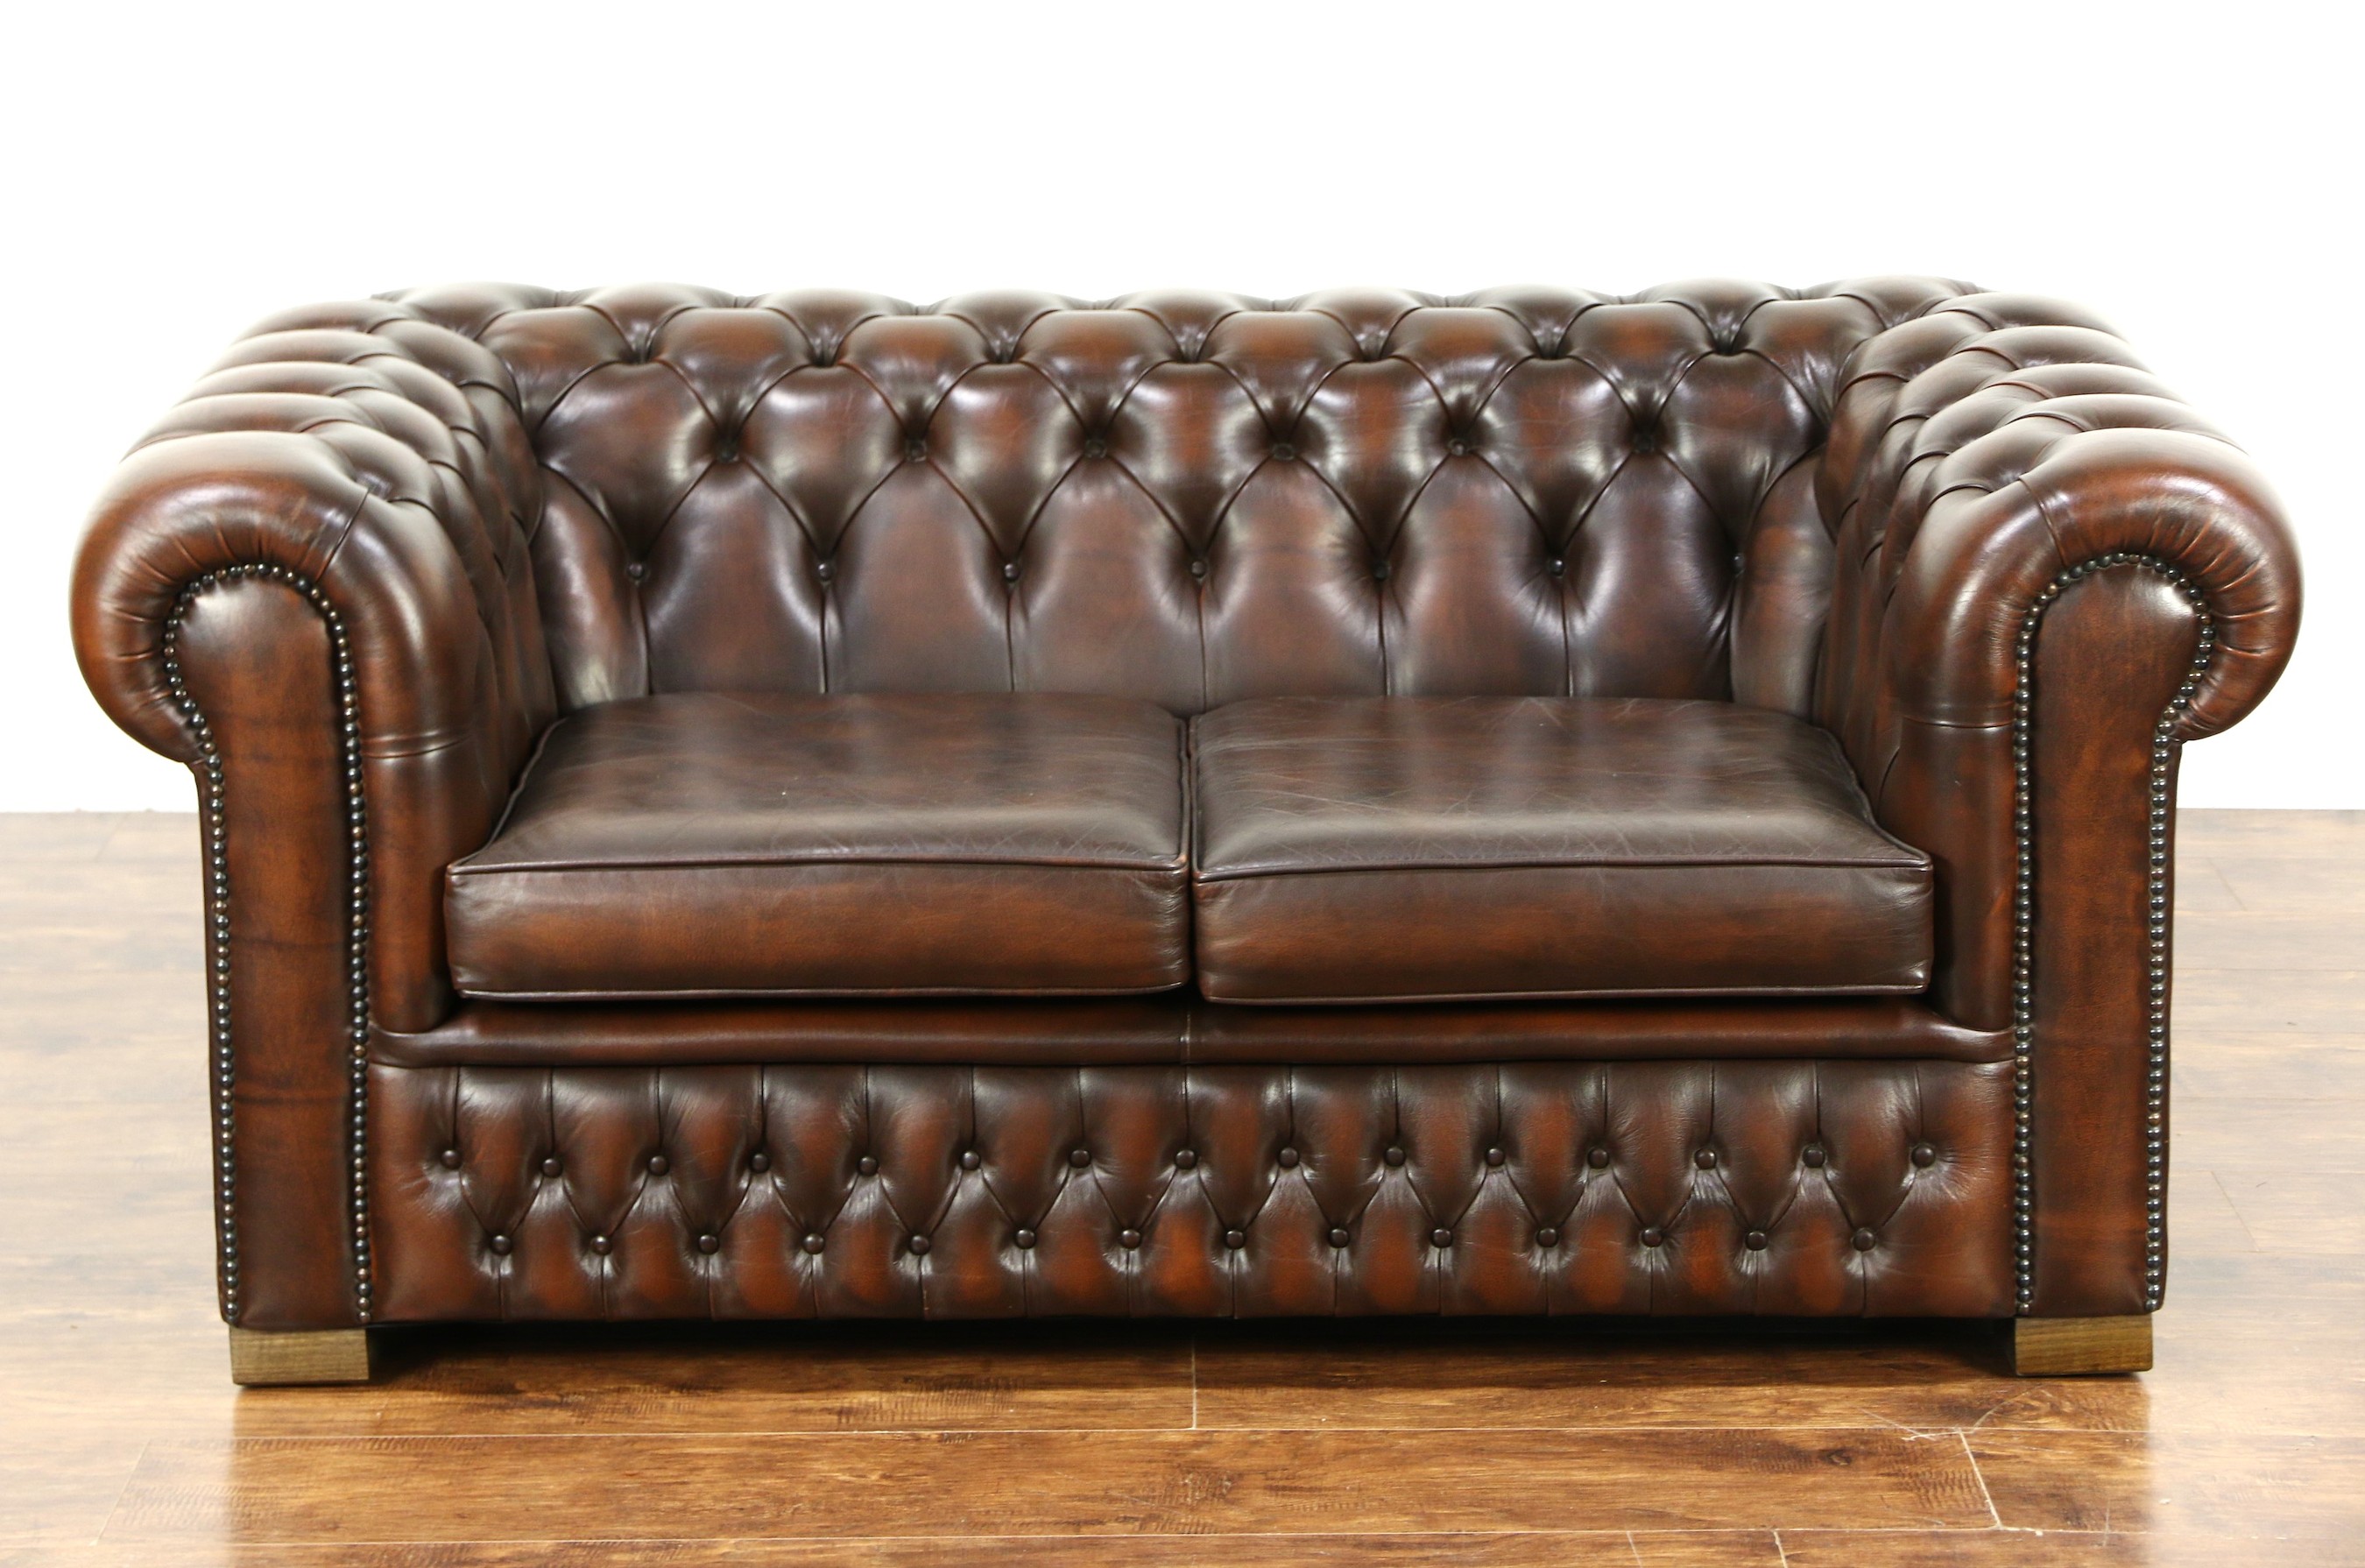 SOLD - Chesterfield Tufted Brown Leather Vintage Scandinavian Loveseat -  Harp Gallery